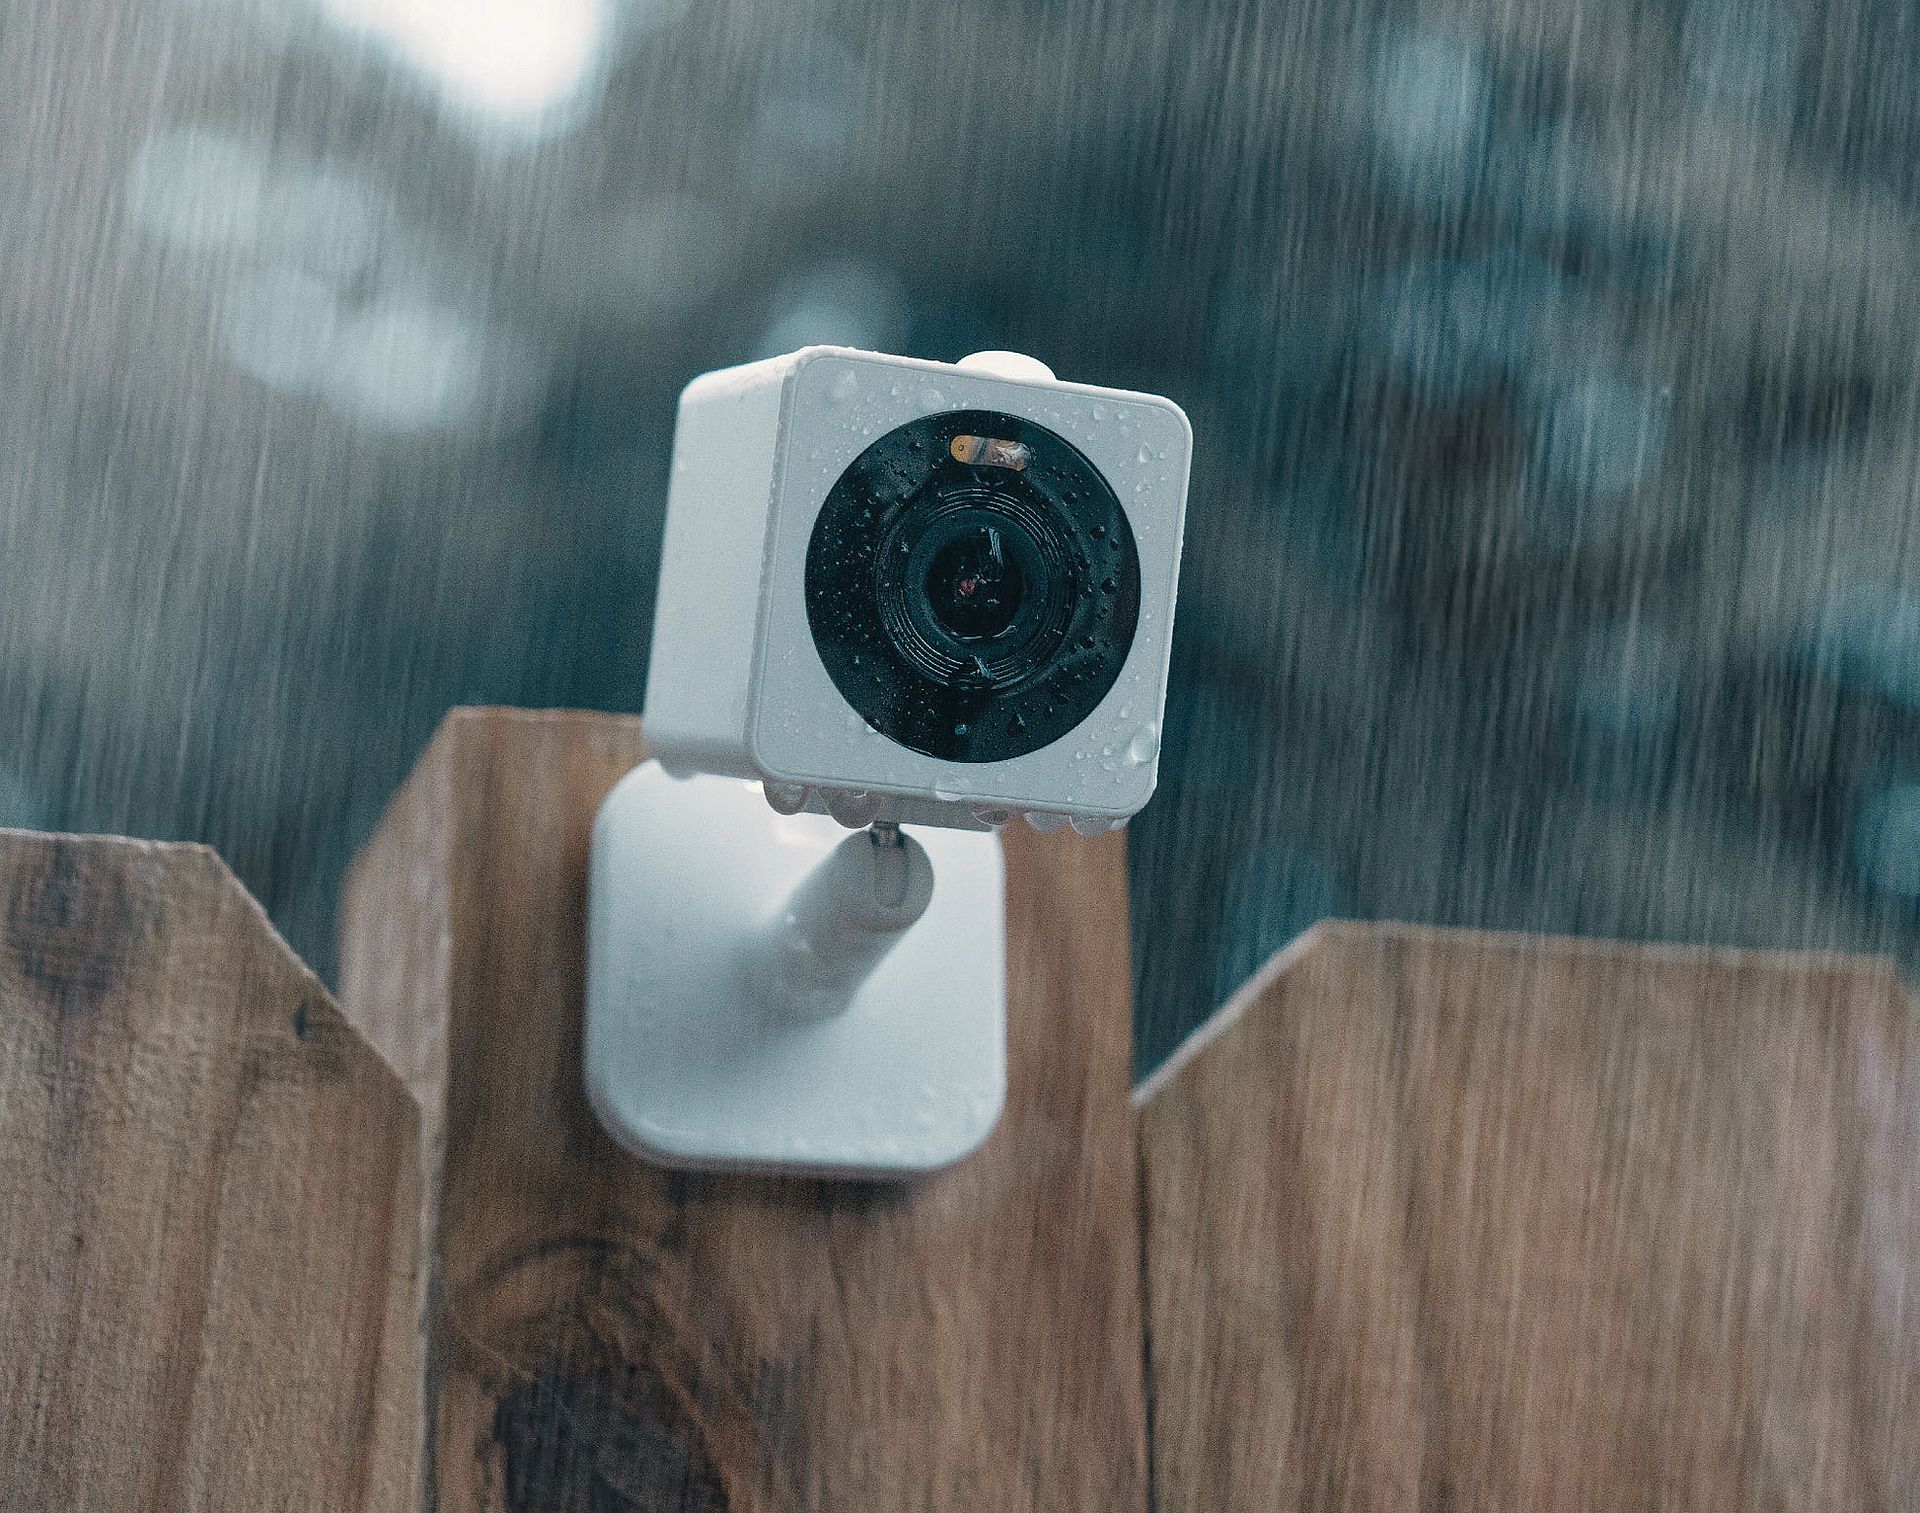 Discover the aftermath of the Wyze camera breach, where privacy was compromised for 13,000 users. Can Wyze recover trust amidst security concerns?